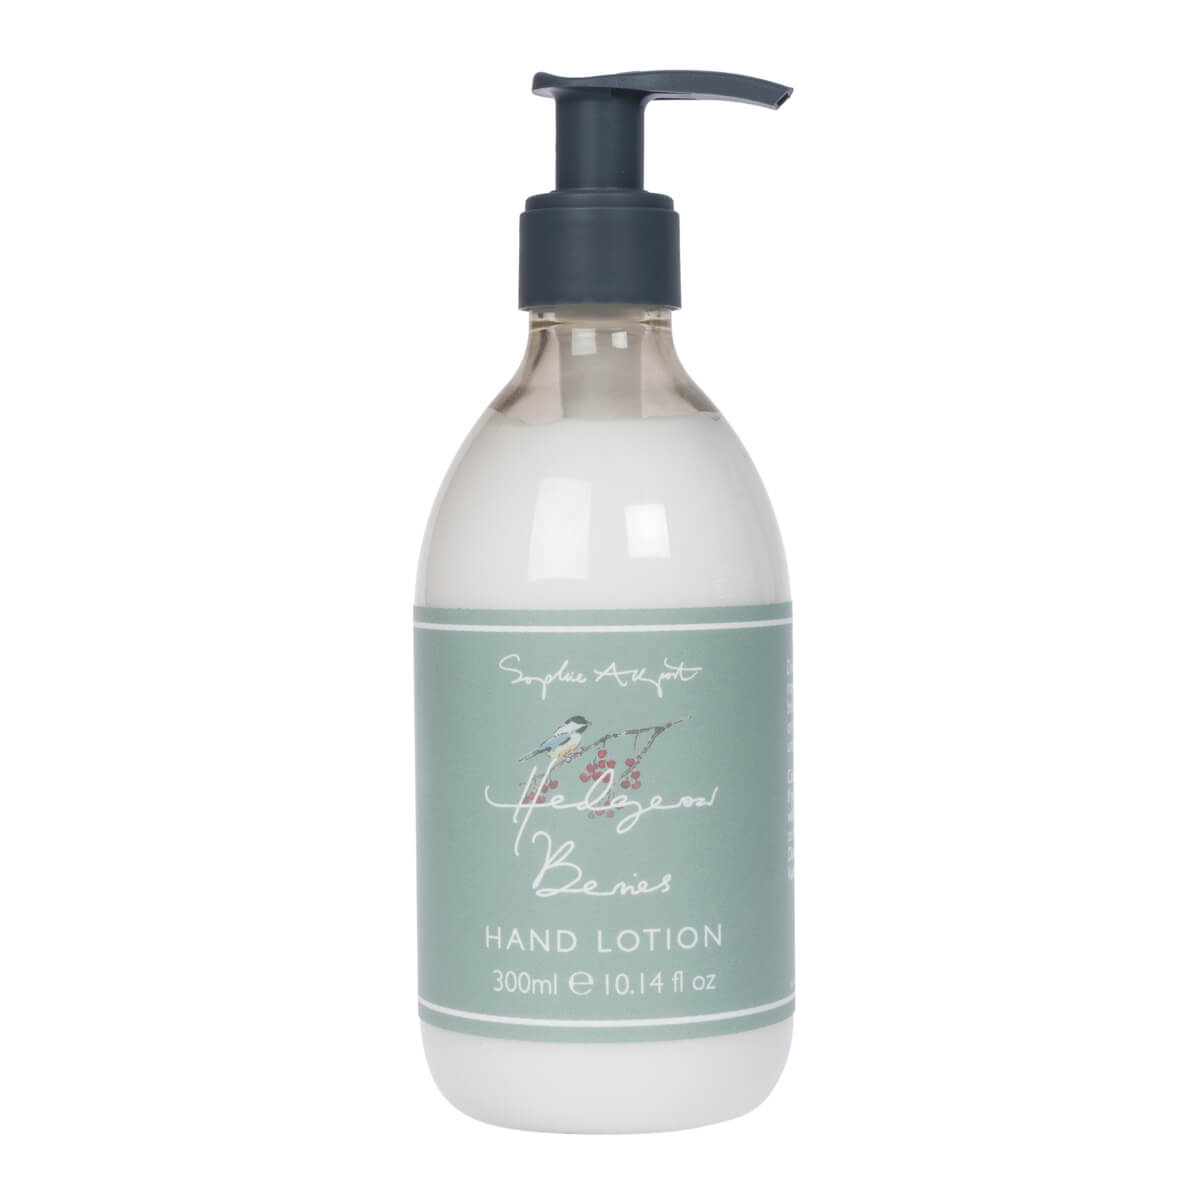 Hedgerow Berries Hand Lotion - 300ml